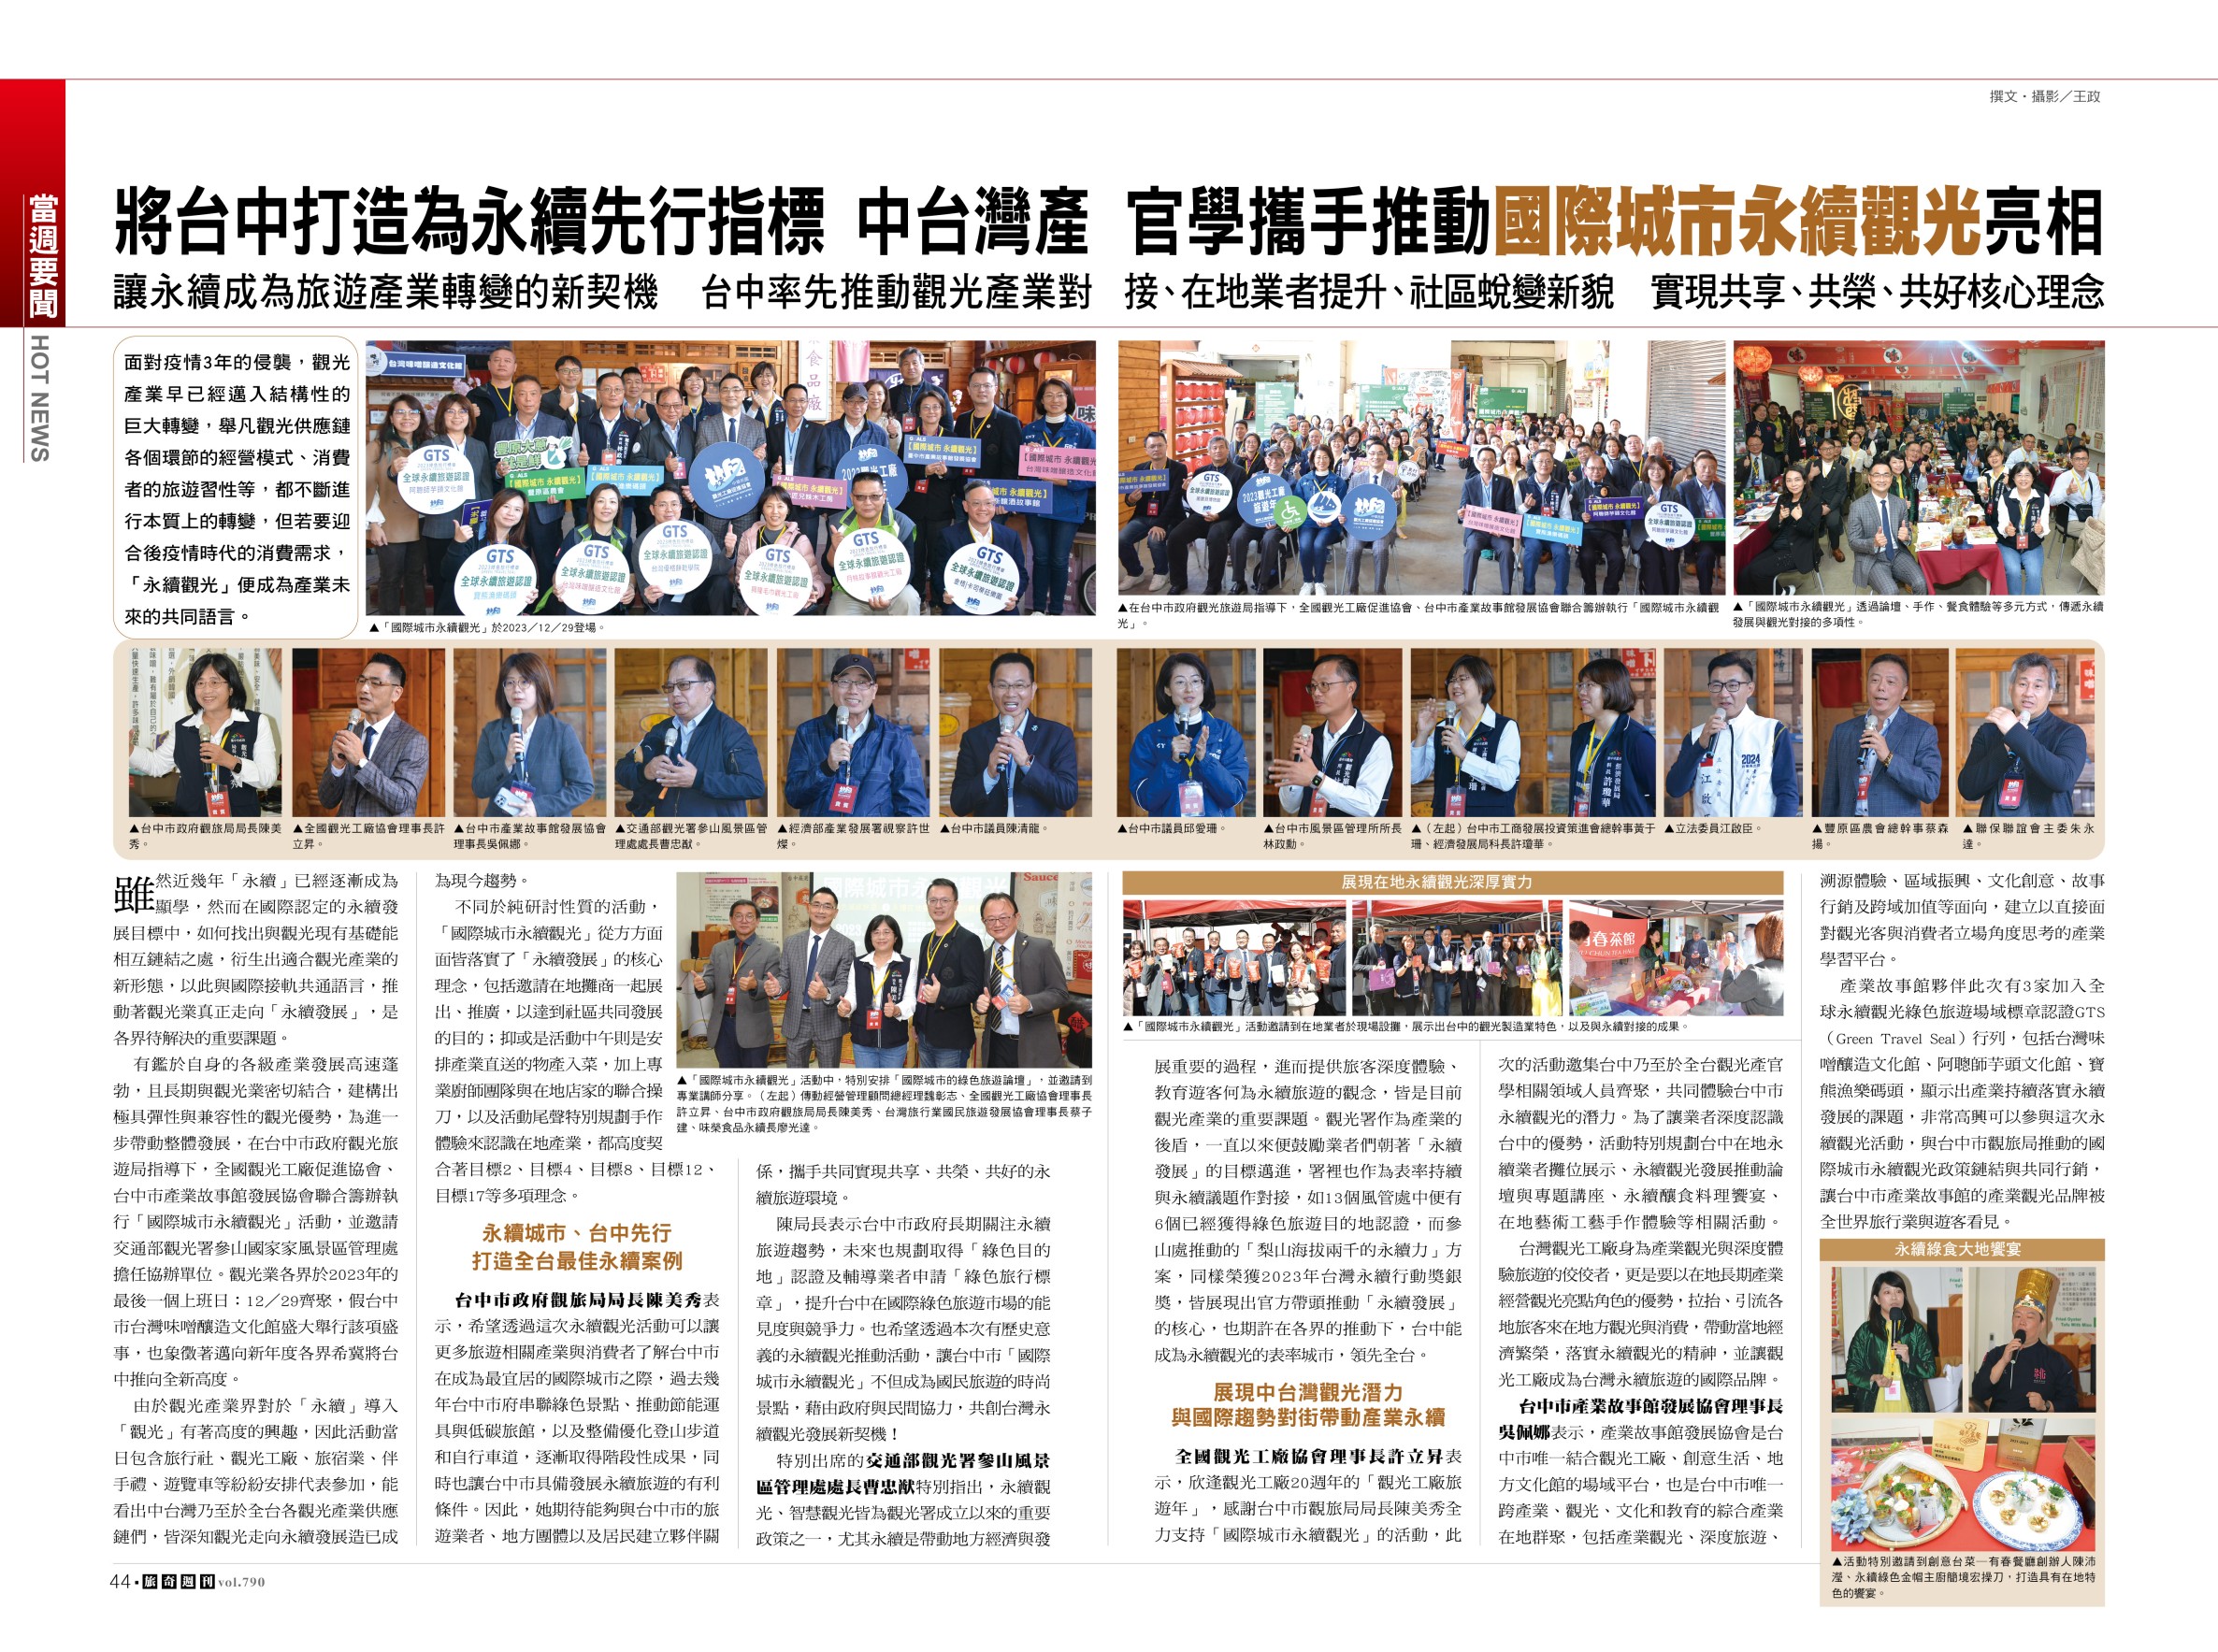 Taichung City’s [International City Tourism Sustainability] Forum was held to promote local lacquer, wood, crafts, agricultural products, food, and green tourism